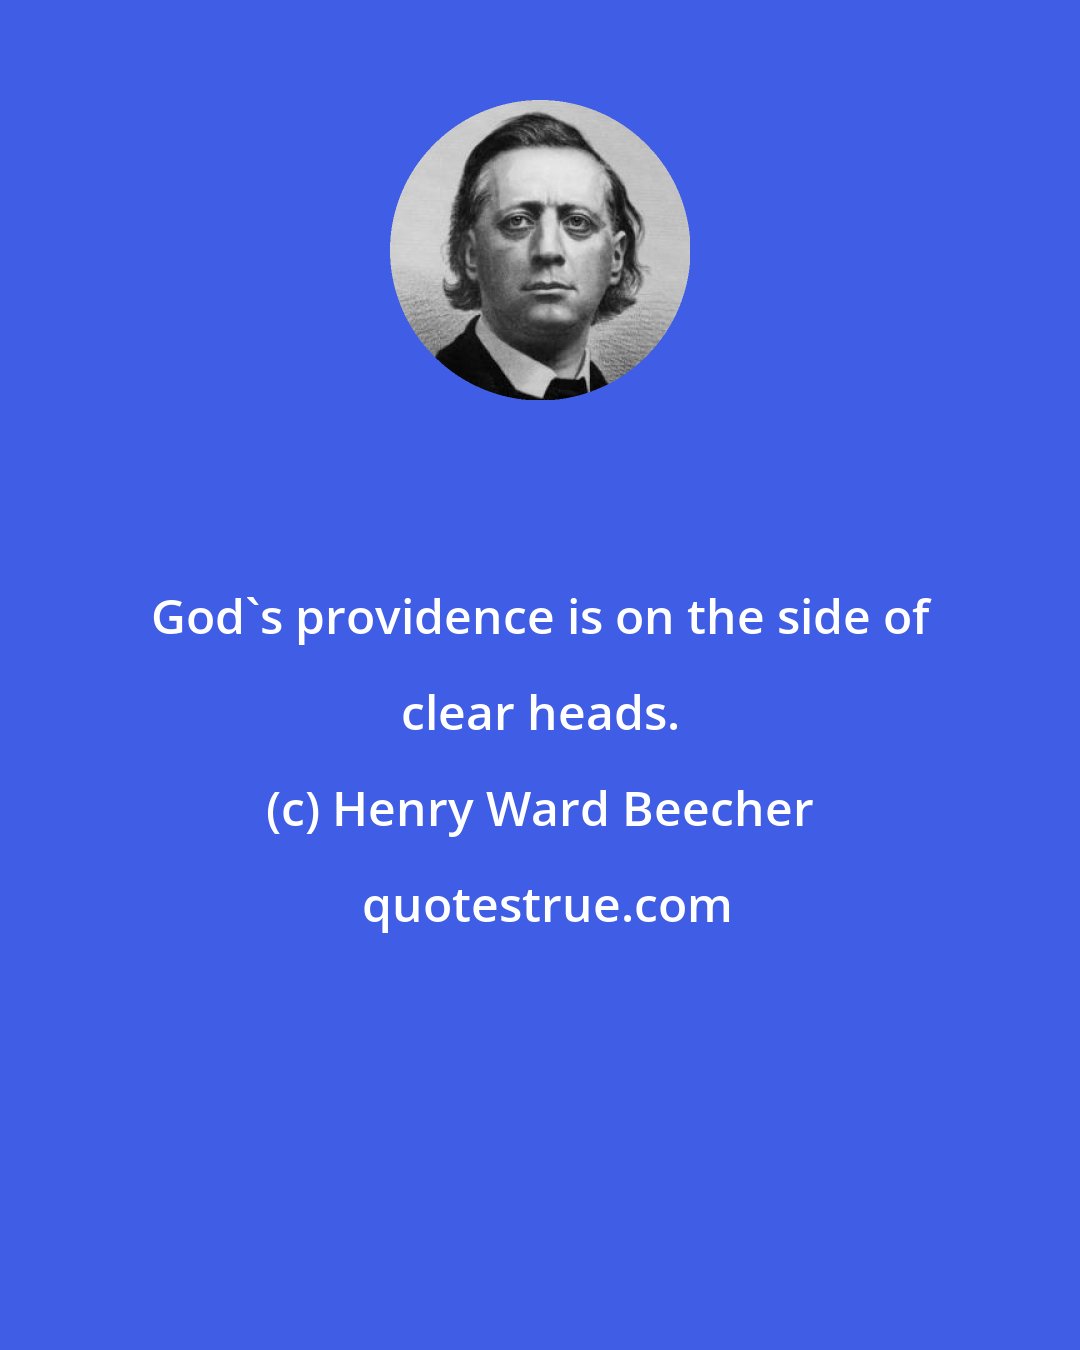 Henry Ward Beecher: God's providence is on the side of clear heads.